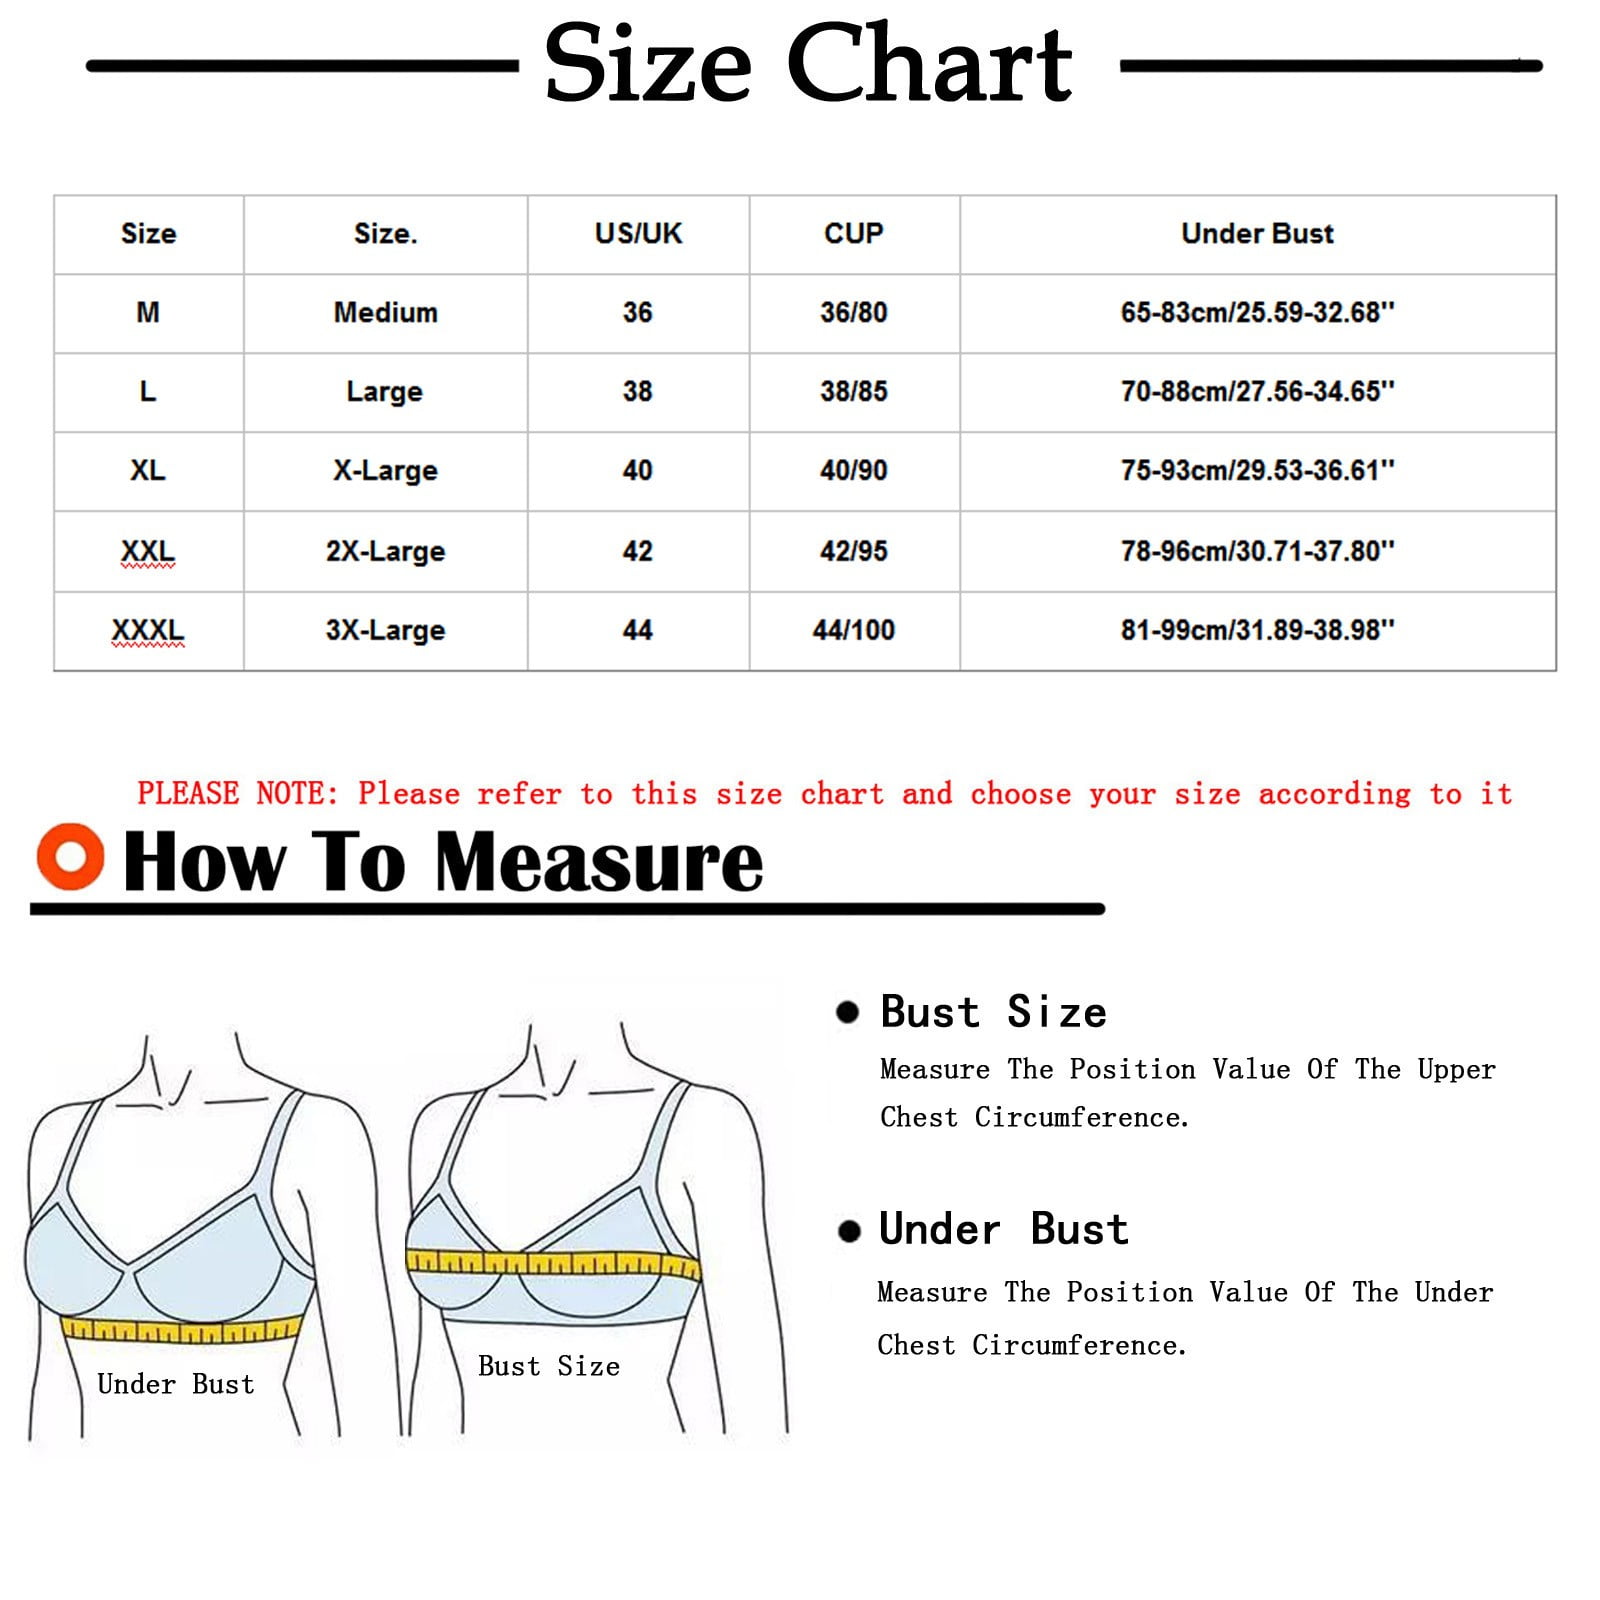 safuny Everyday Bra for Women Lace Ultra Light Lingerie Thin and Adjustable  Droop Back Wrap Up Comfort Daily Brassiere Underwear Wireless Push-Up Bra